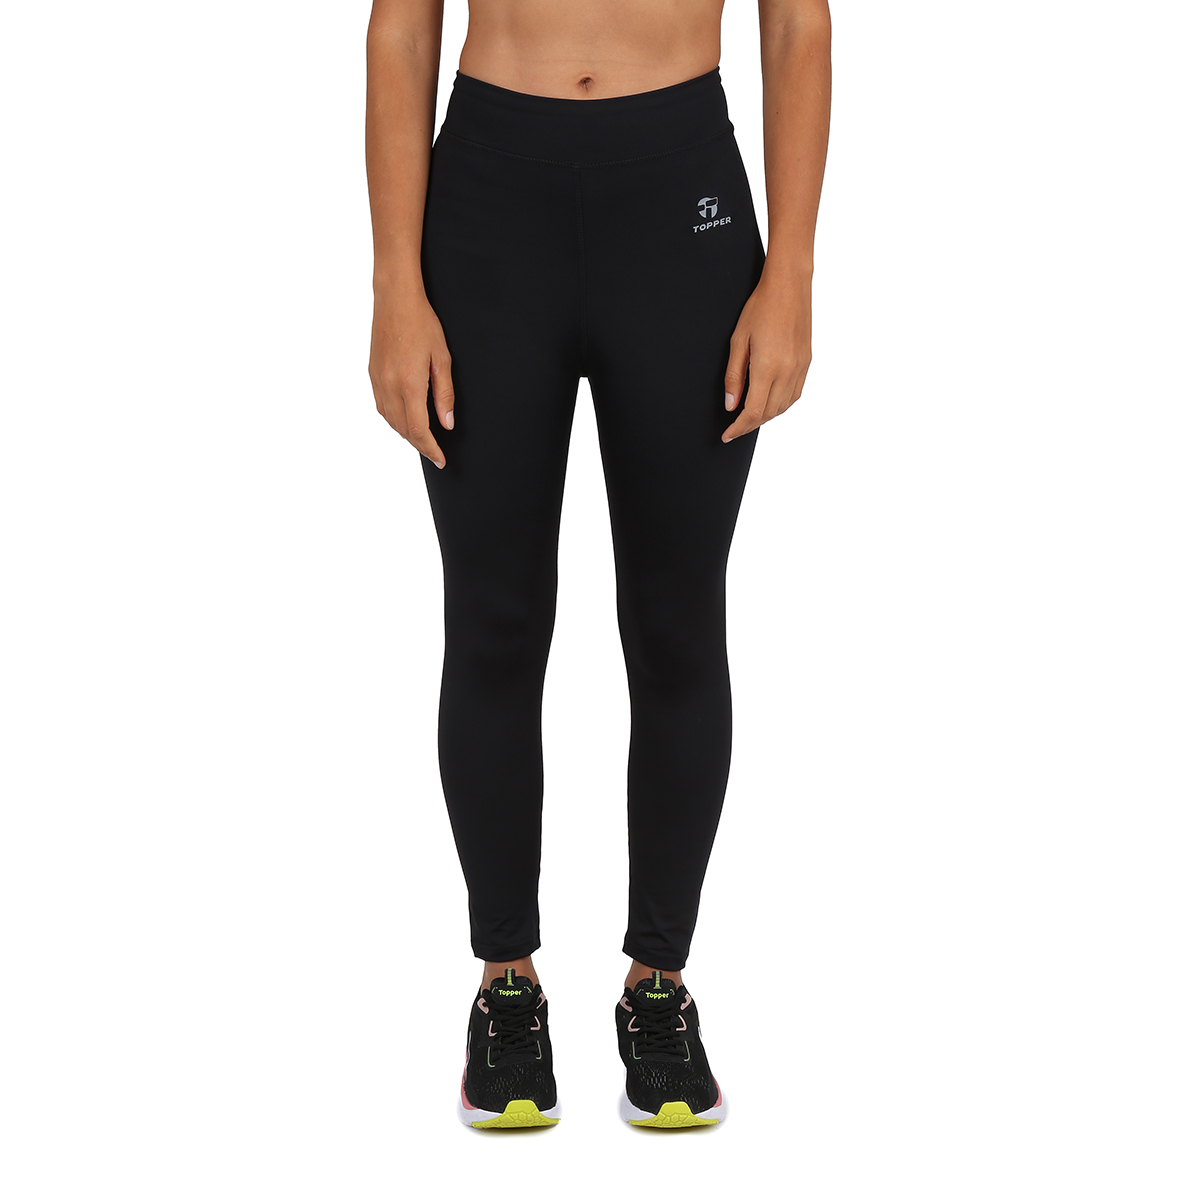 Calza Entrenamiento Topper 7-8 Mujer,  image number null